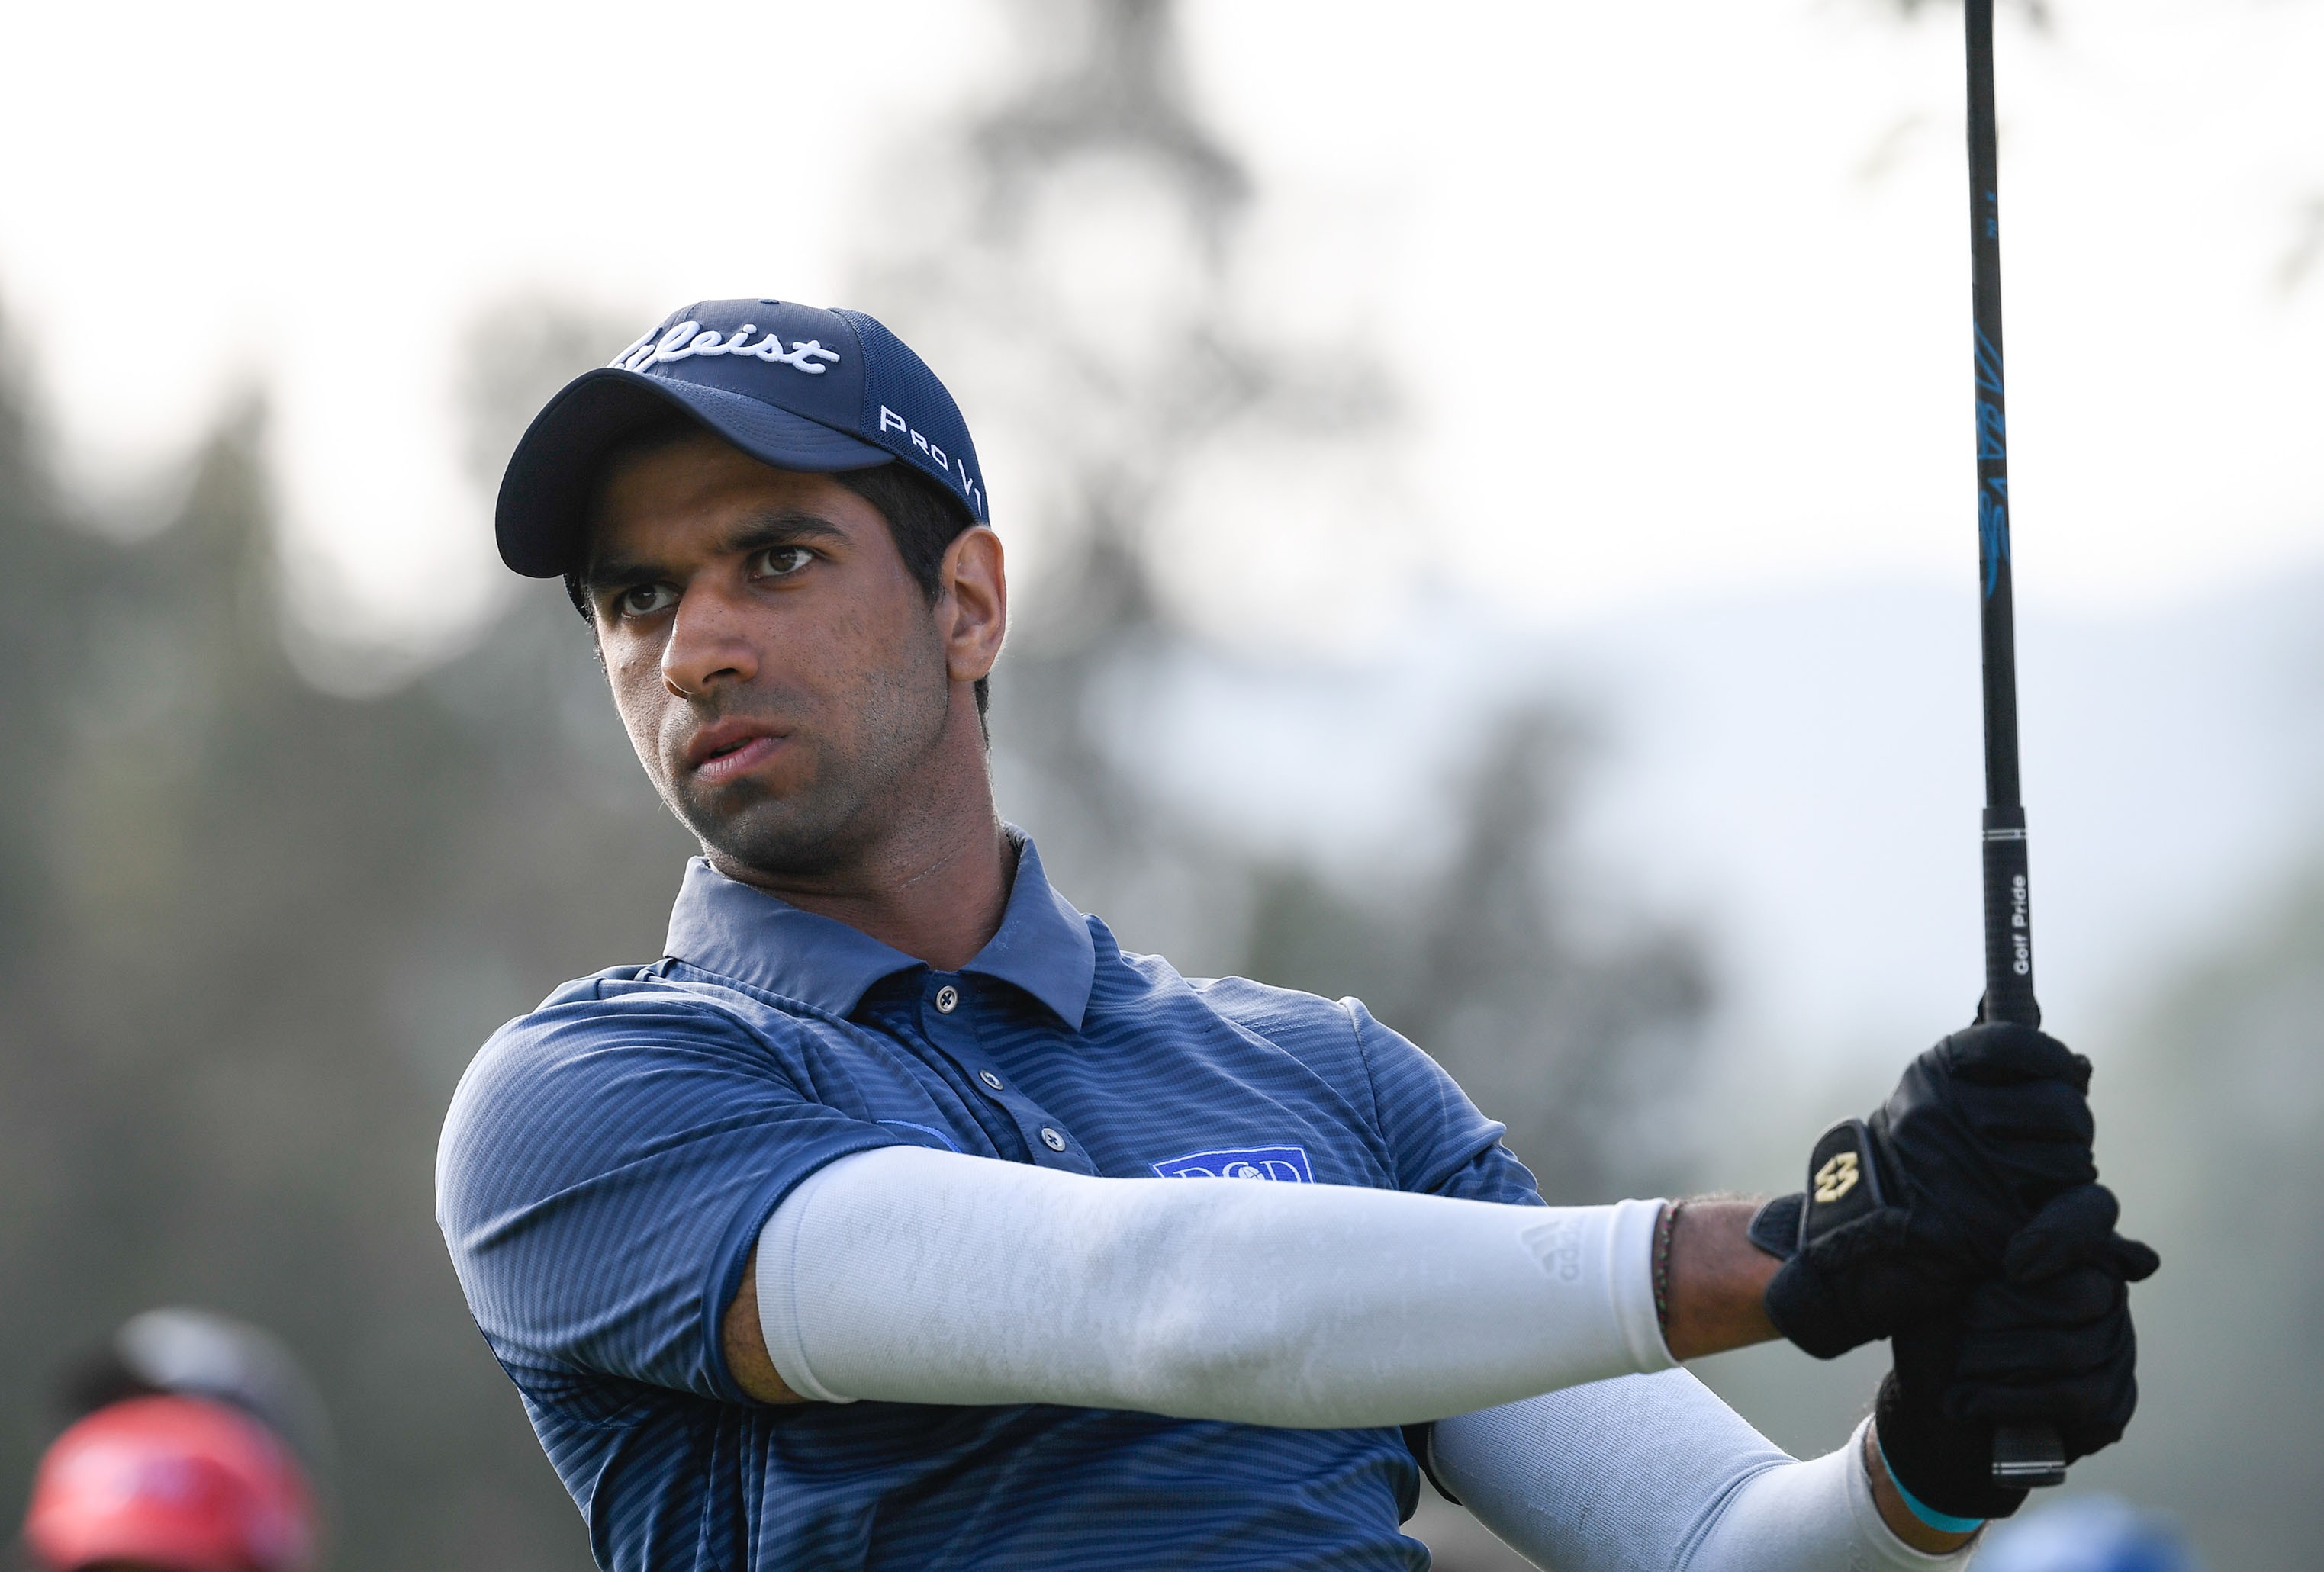 Aaron Rai during the first round of the Hong Kong Open. Photos: Richard Castka